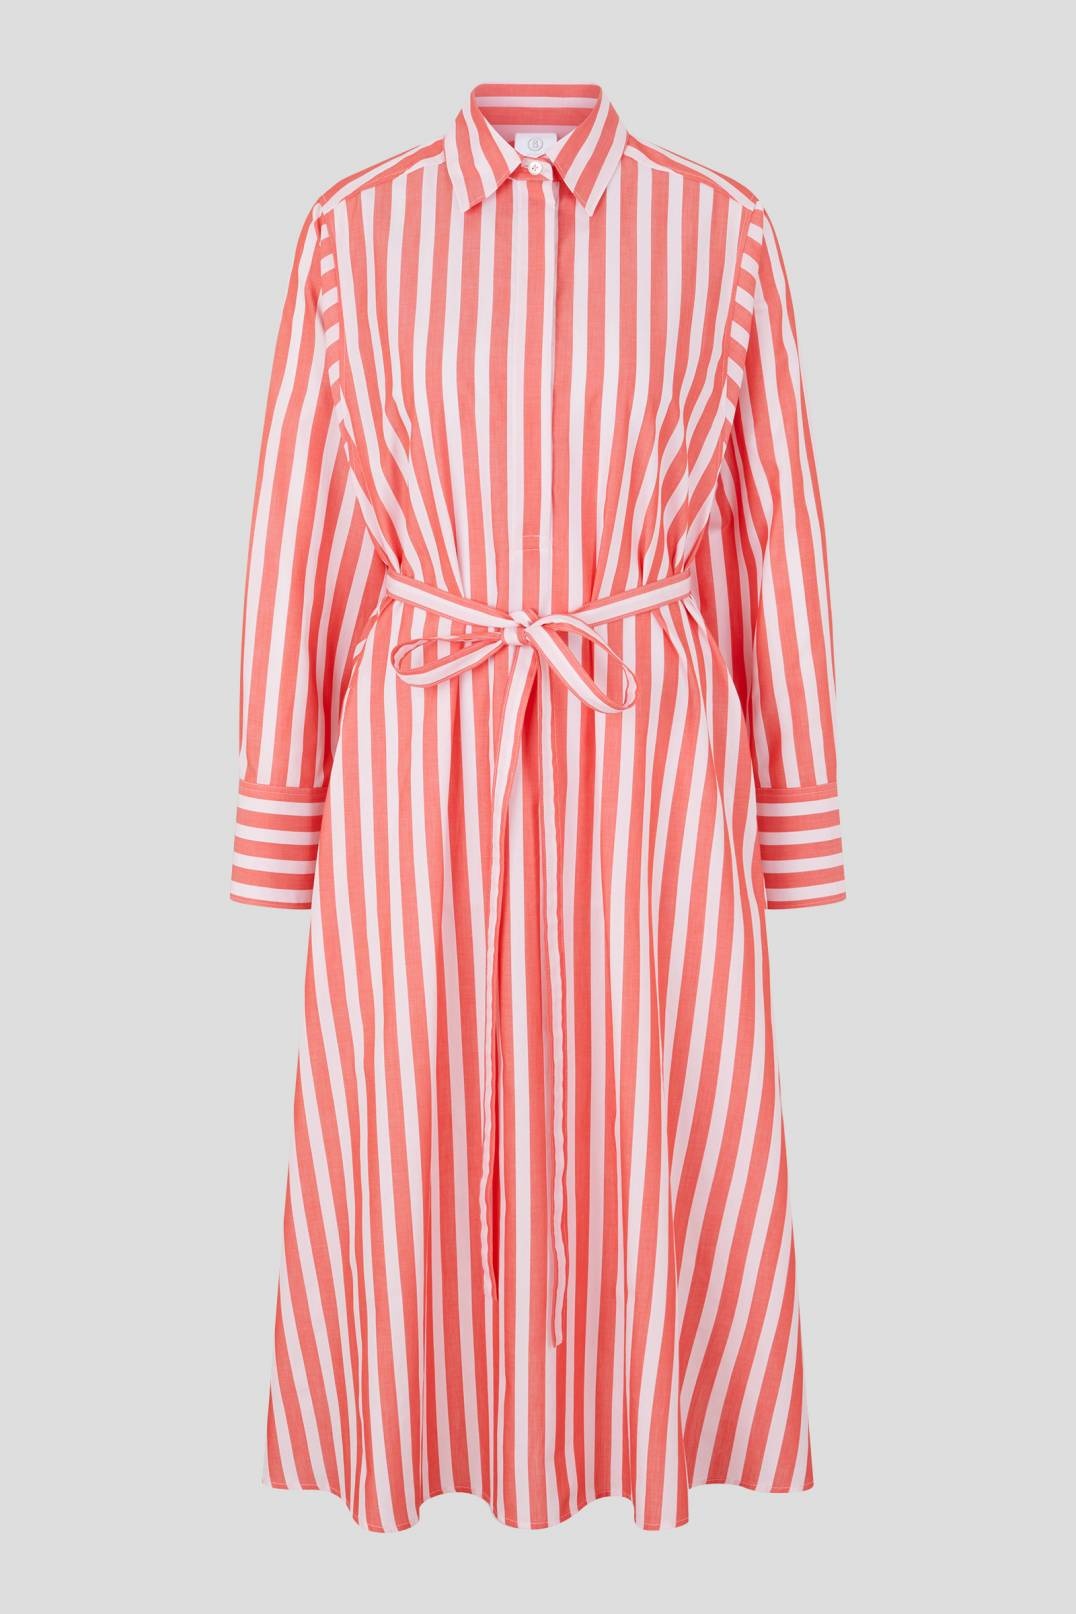 LIA SHIRT DRESS IN RED/OFF-WHITE - 1